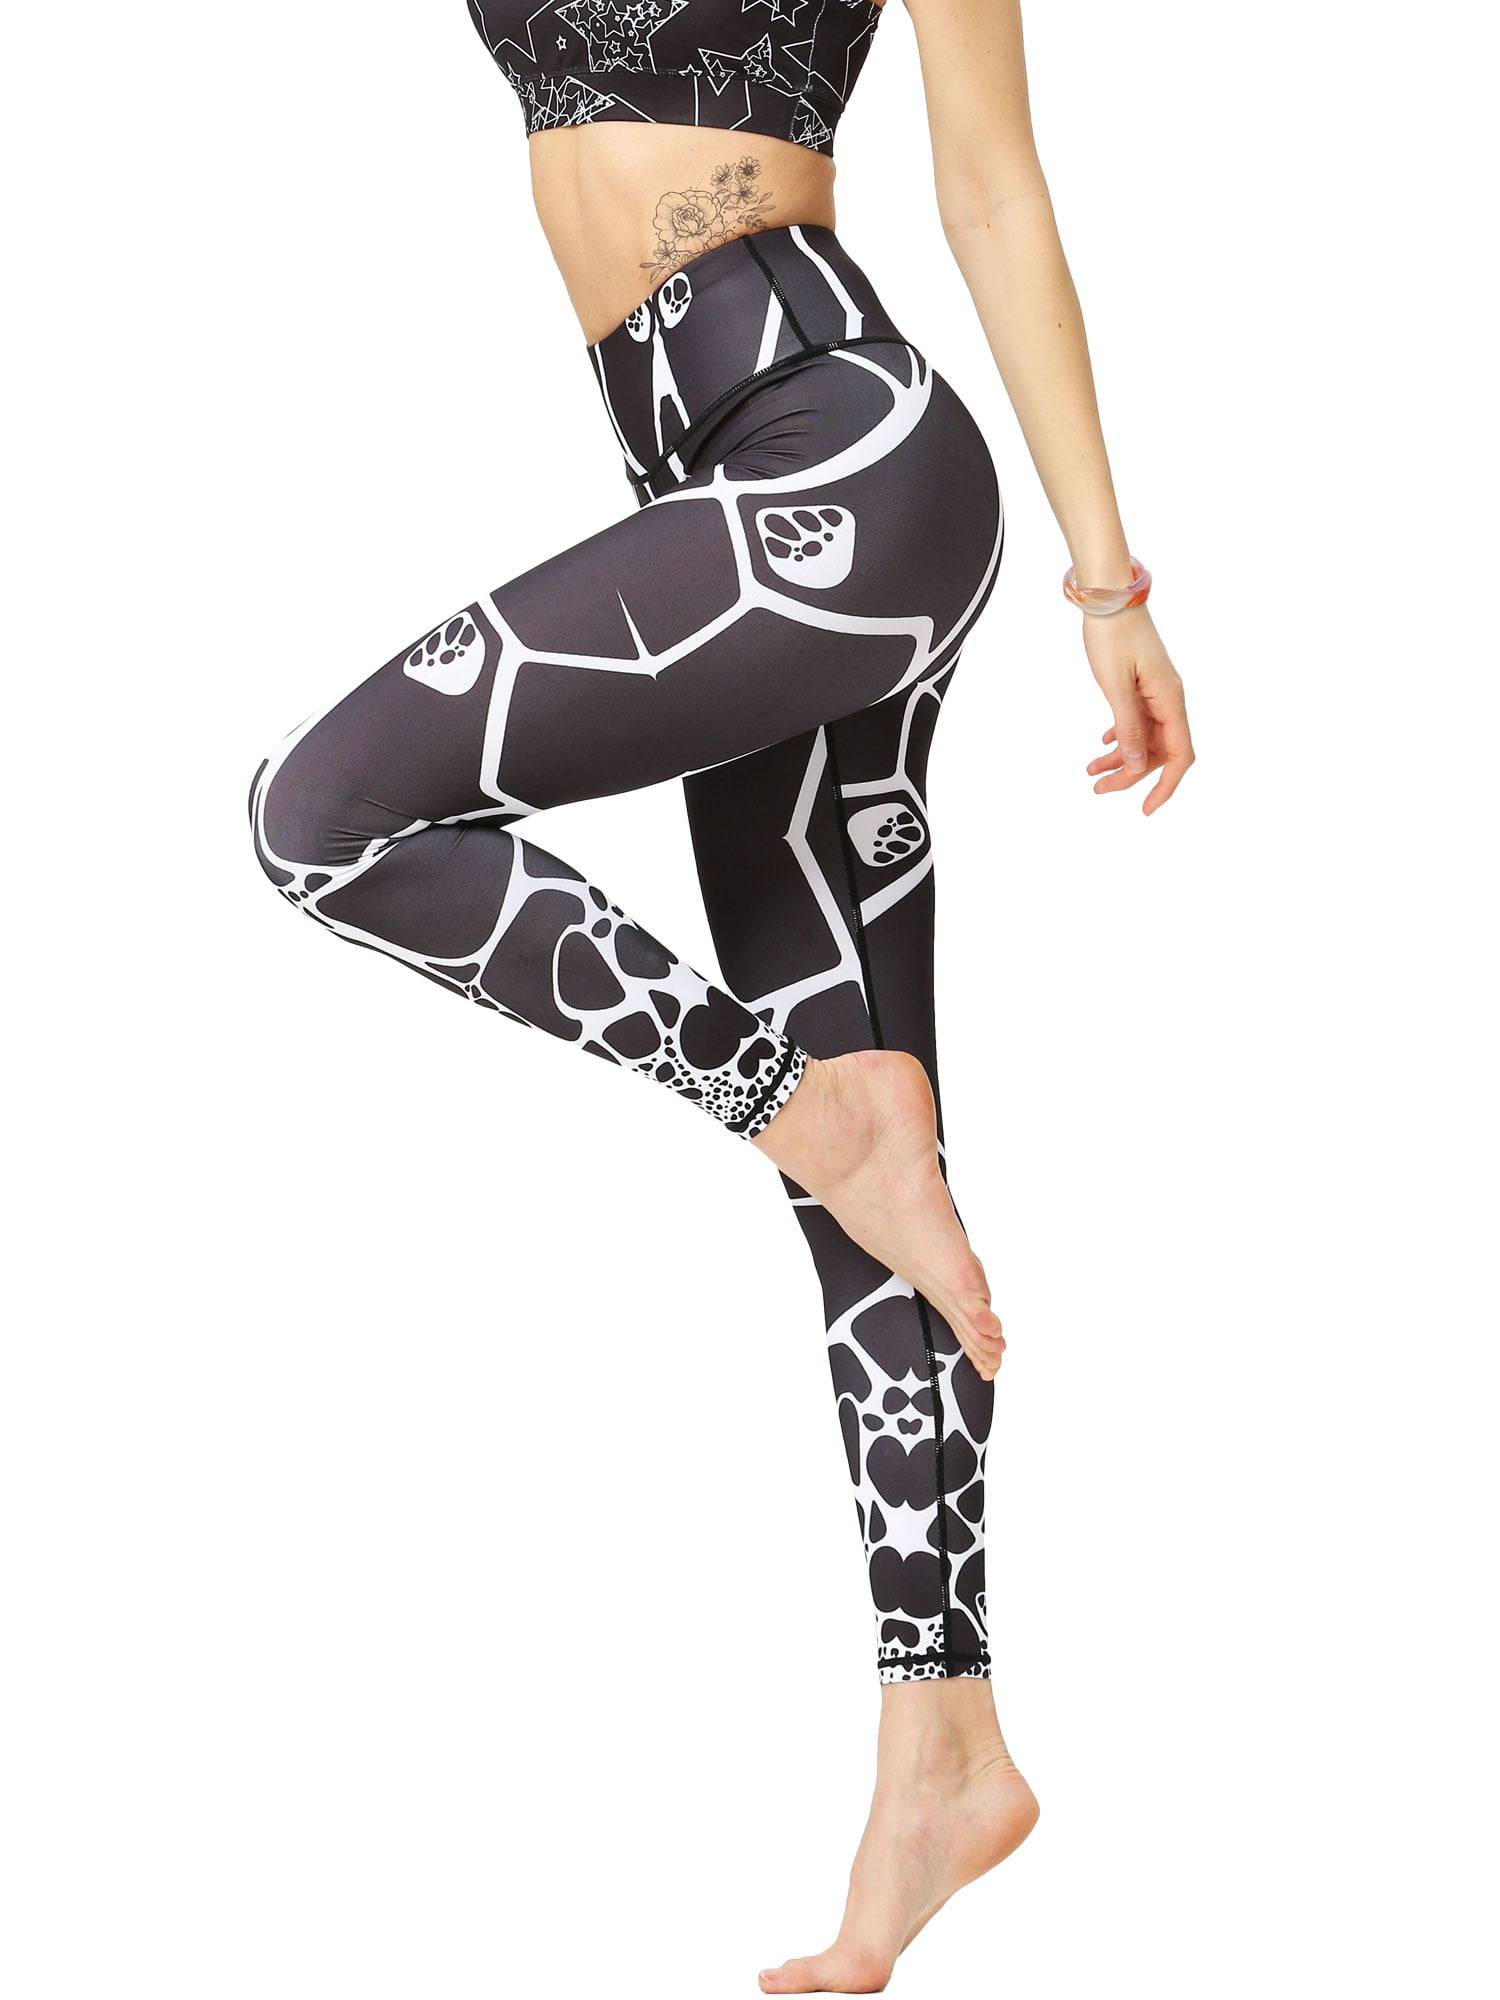 Details about   Womens Skinny Yoga Pants Gym Leggings Sports Gym Running Fitness Trousers Bottom 